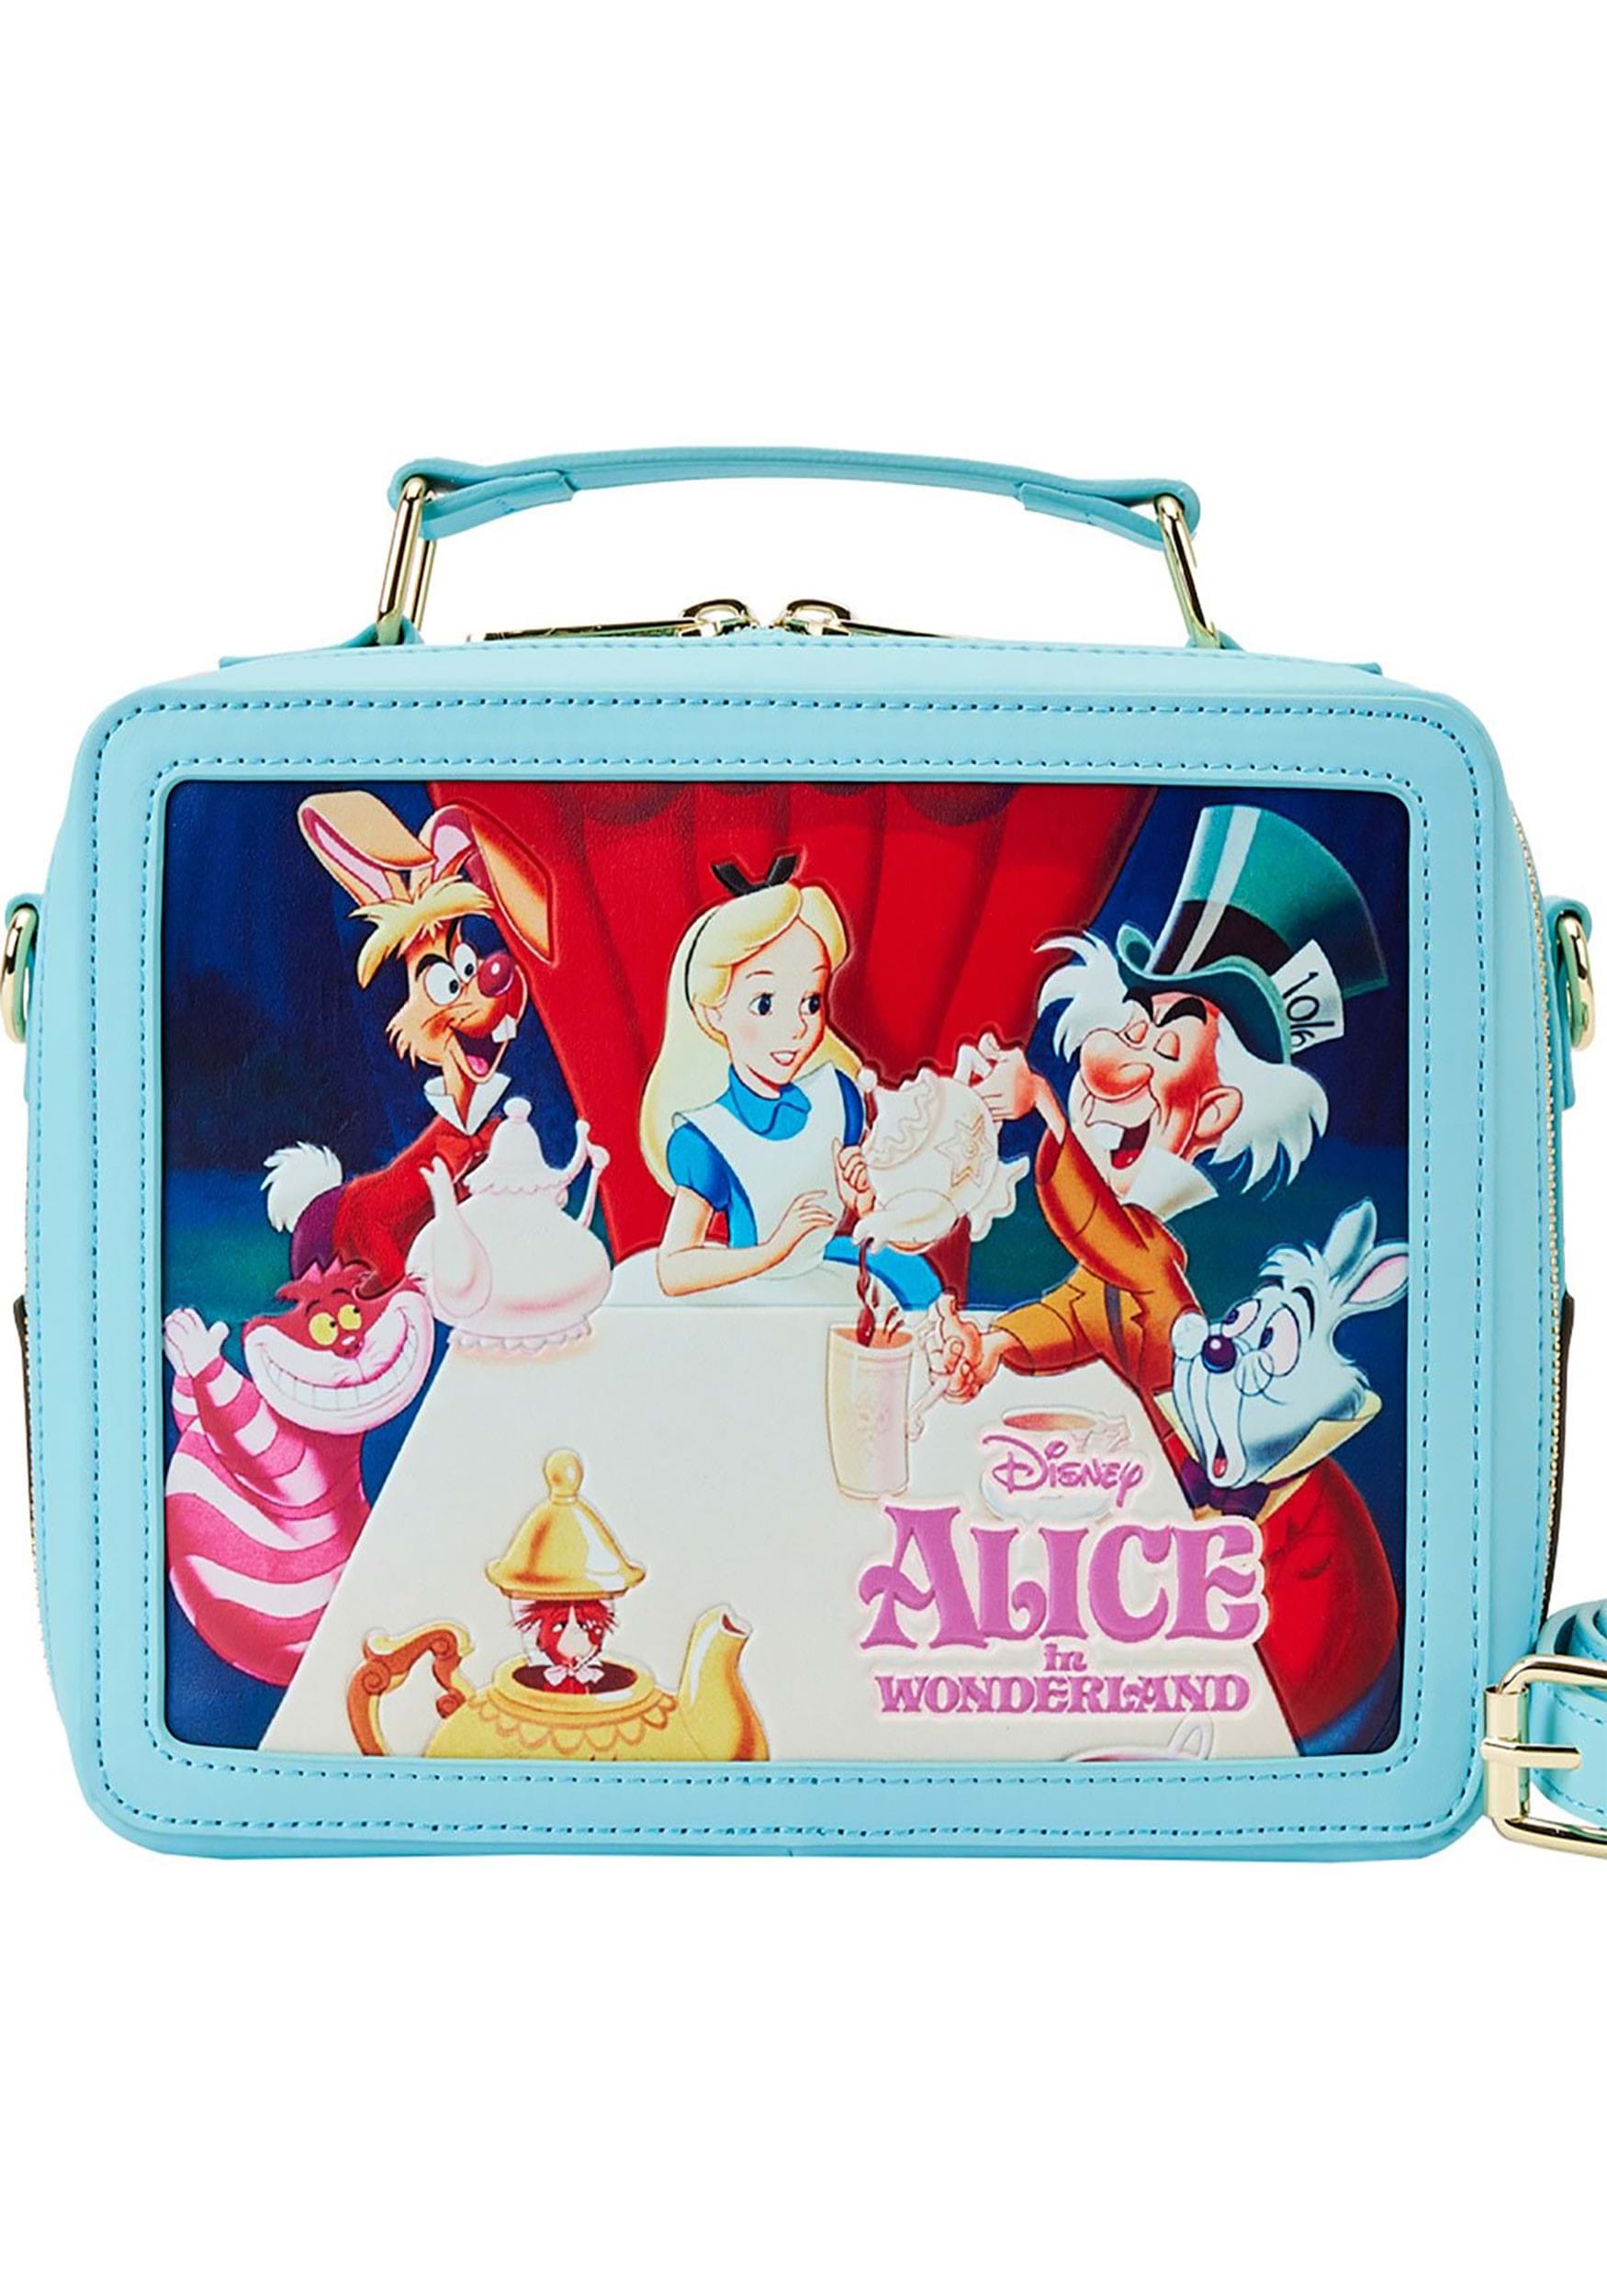 https://images.fun.com/products/91364/1-1/loungefly-disney-alice-in-wonderland-lunch-box-crossbody-bag.jpg